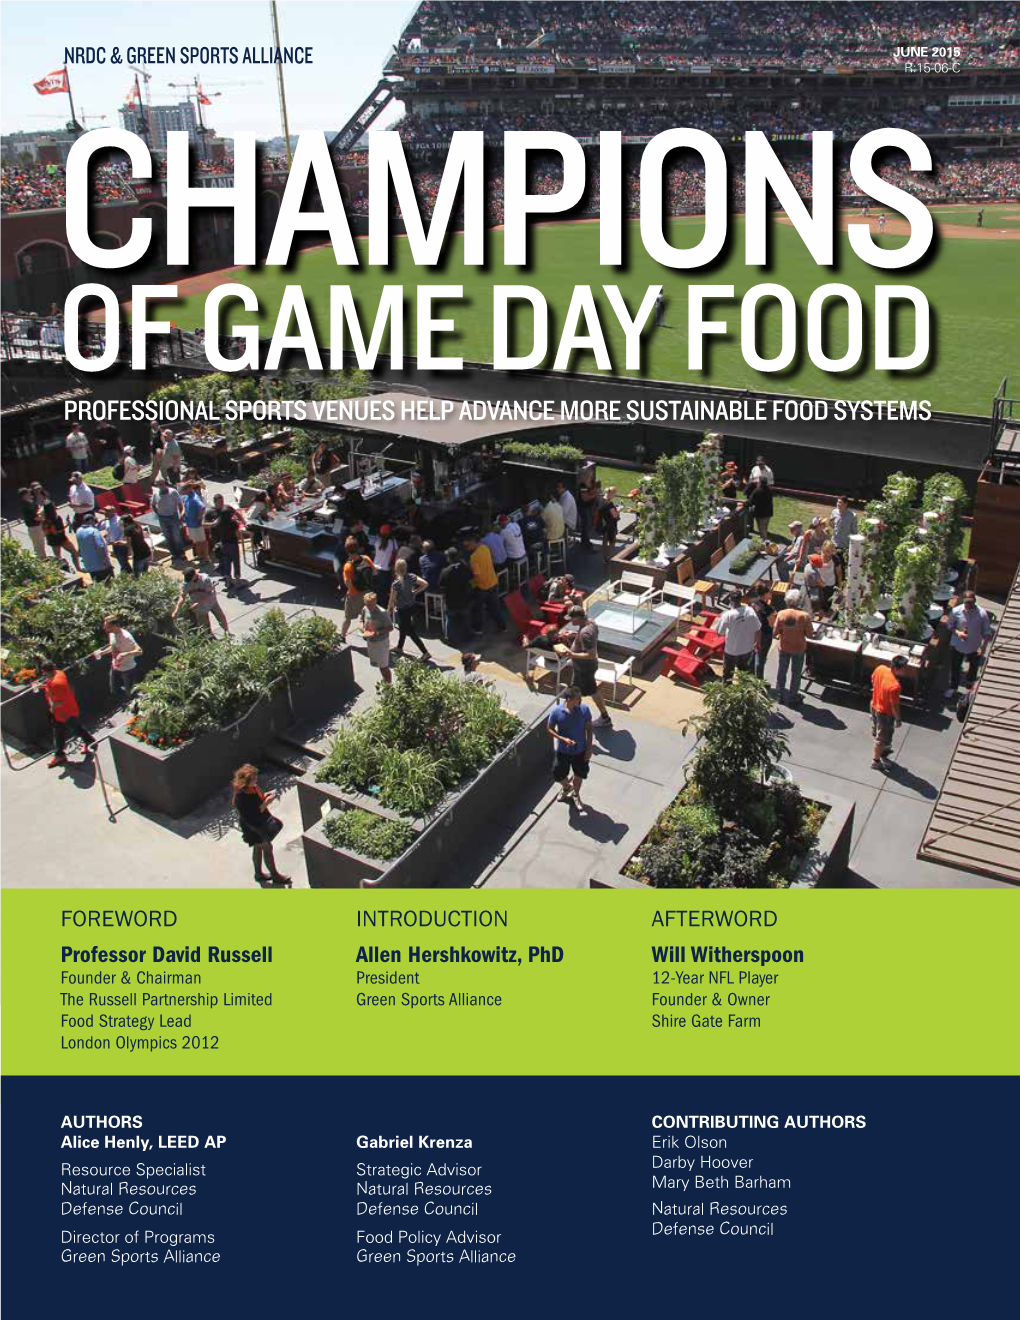 NRDC: Champions of Game Day Food (PDF)